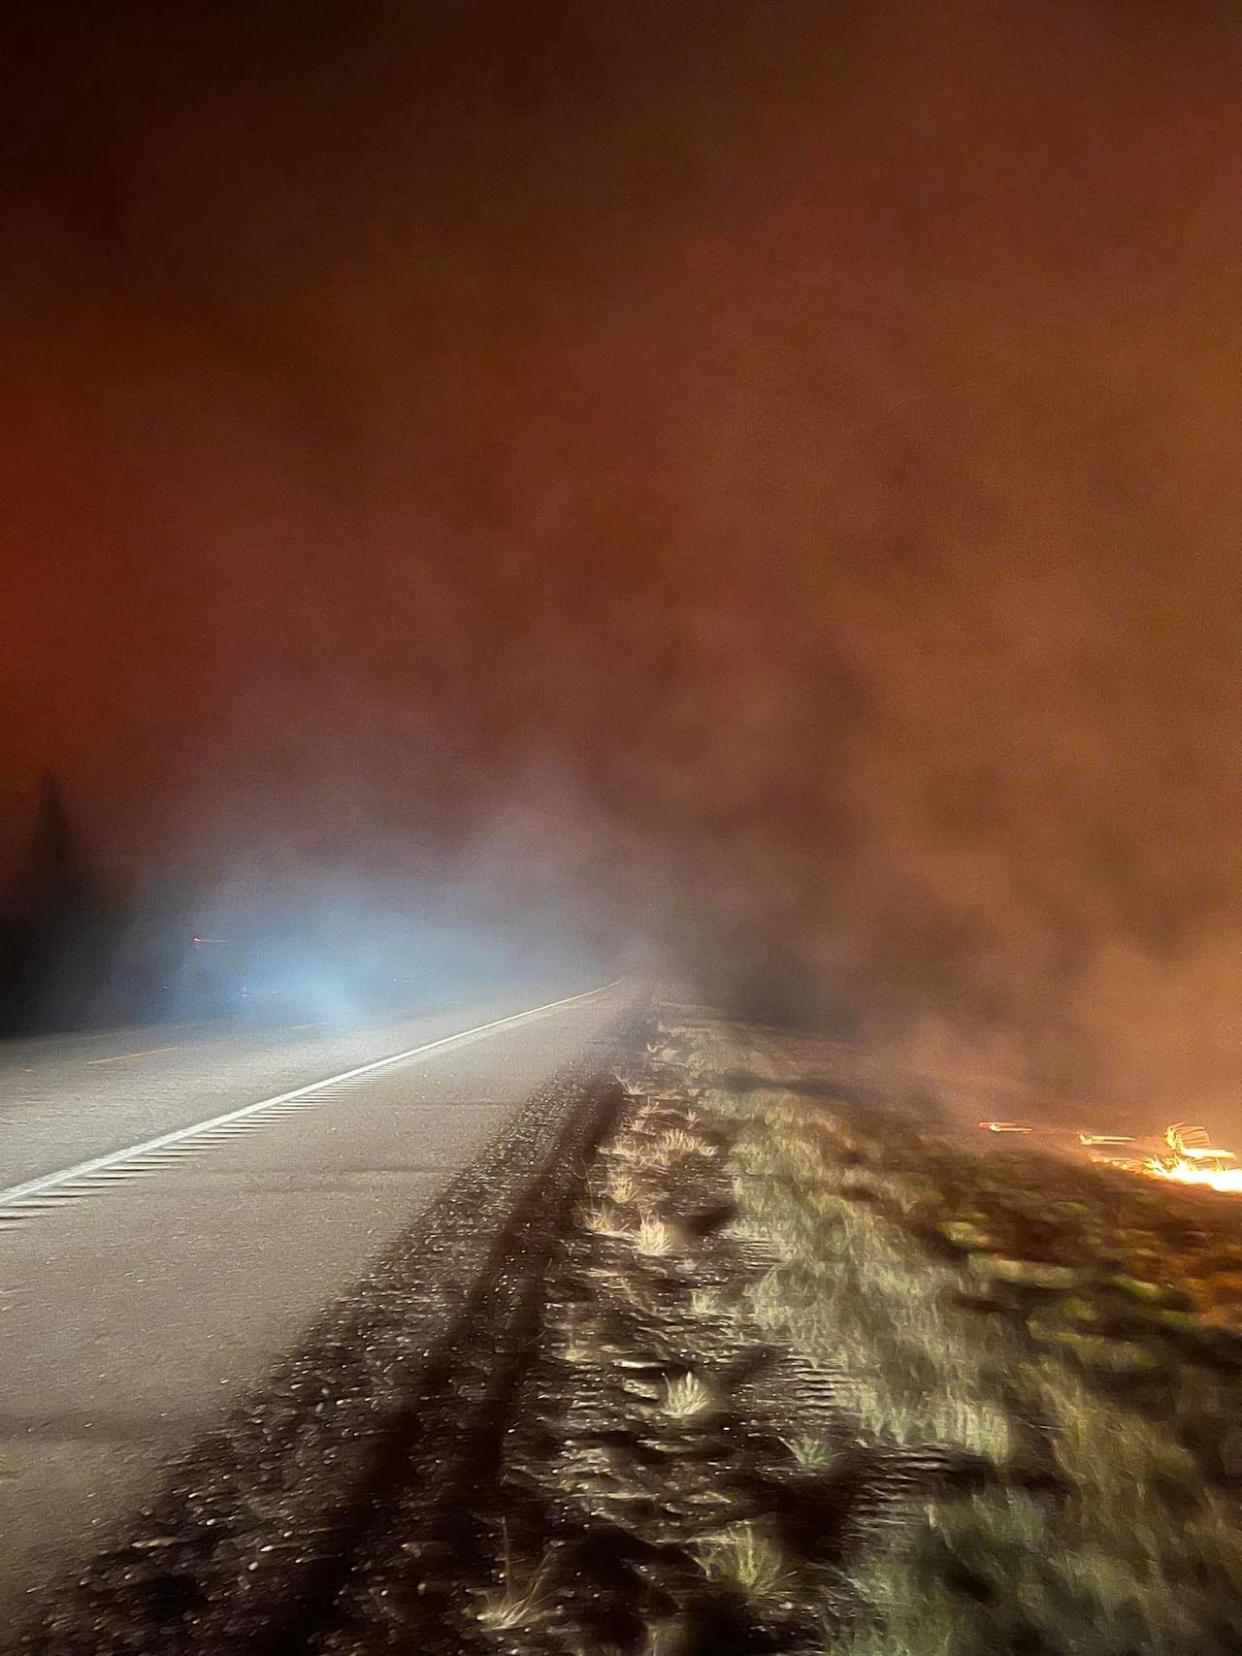 A critical evacuation order was issued by the Alberta Emergency Management Agency late Friday night for the community of Chateh, Alta. (Submitted by Christian Mer - image credit)